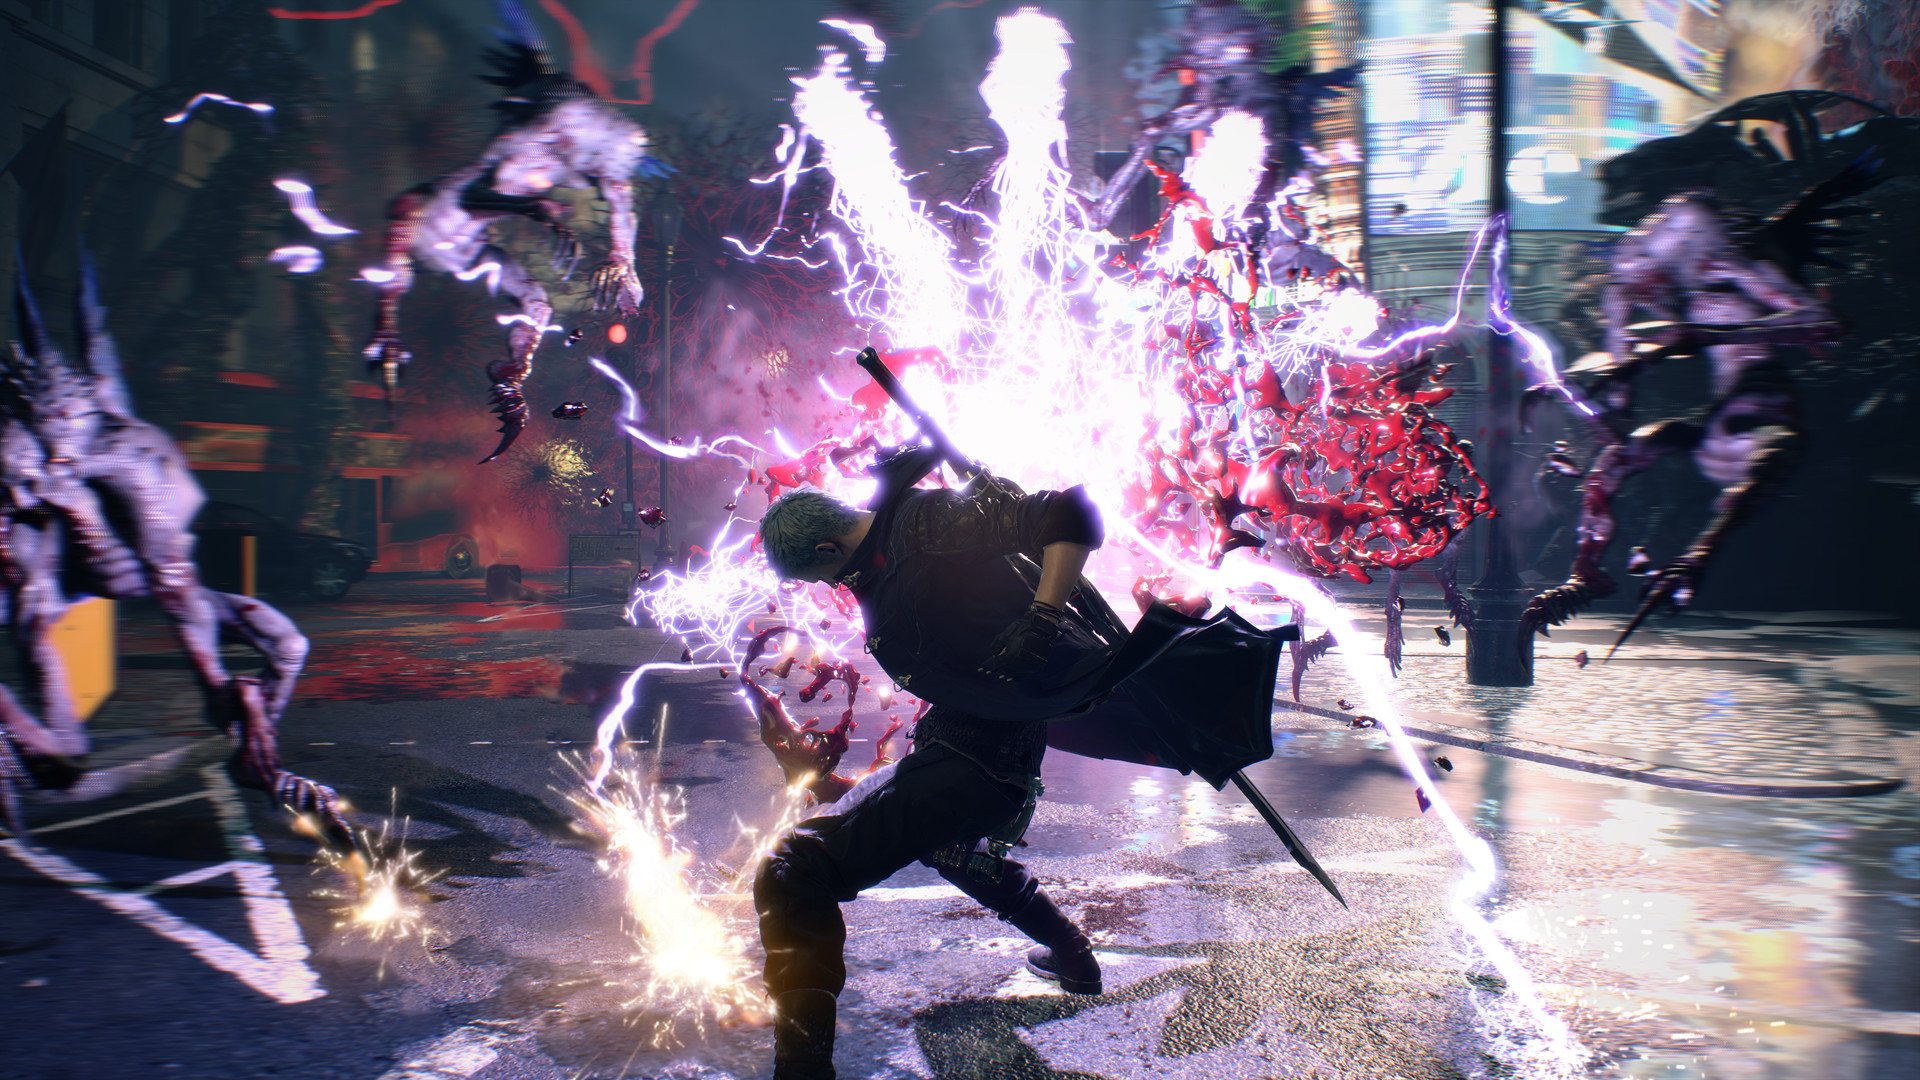 Devil May Cry 5 PlayStation 4 Account pixelpuffin.net Activation Link 13.55$